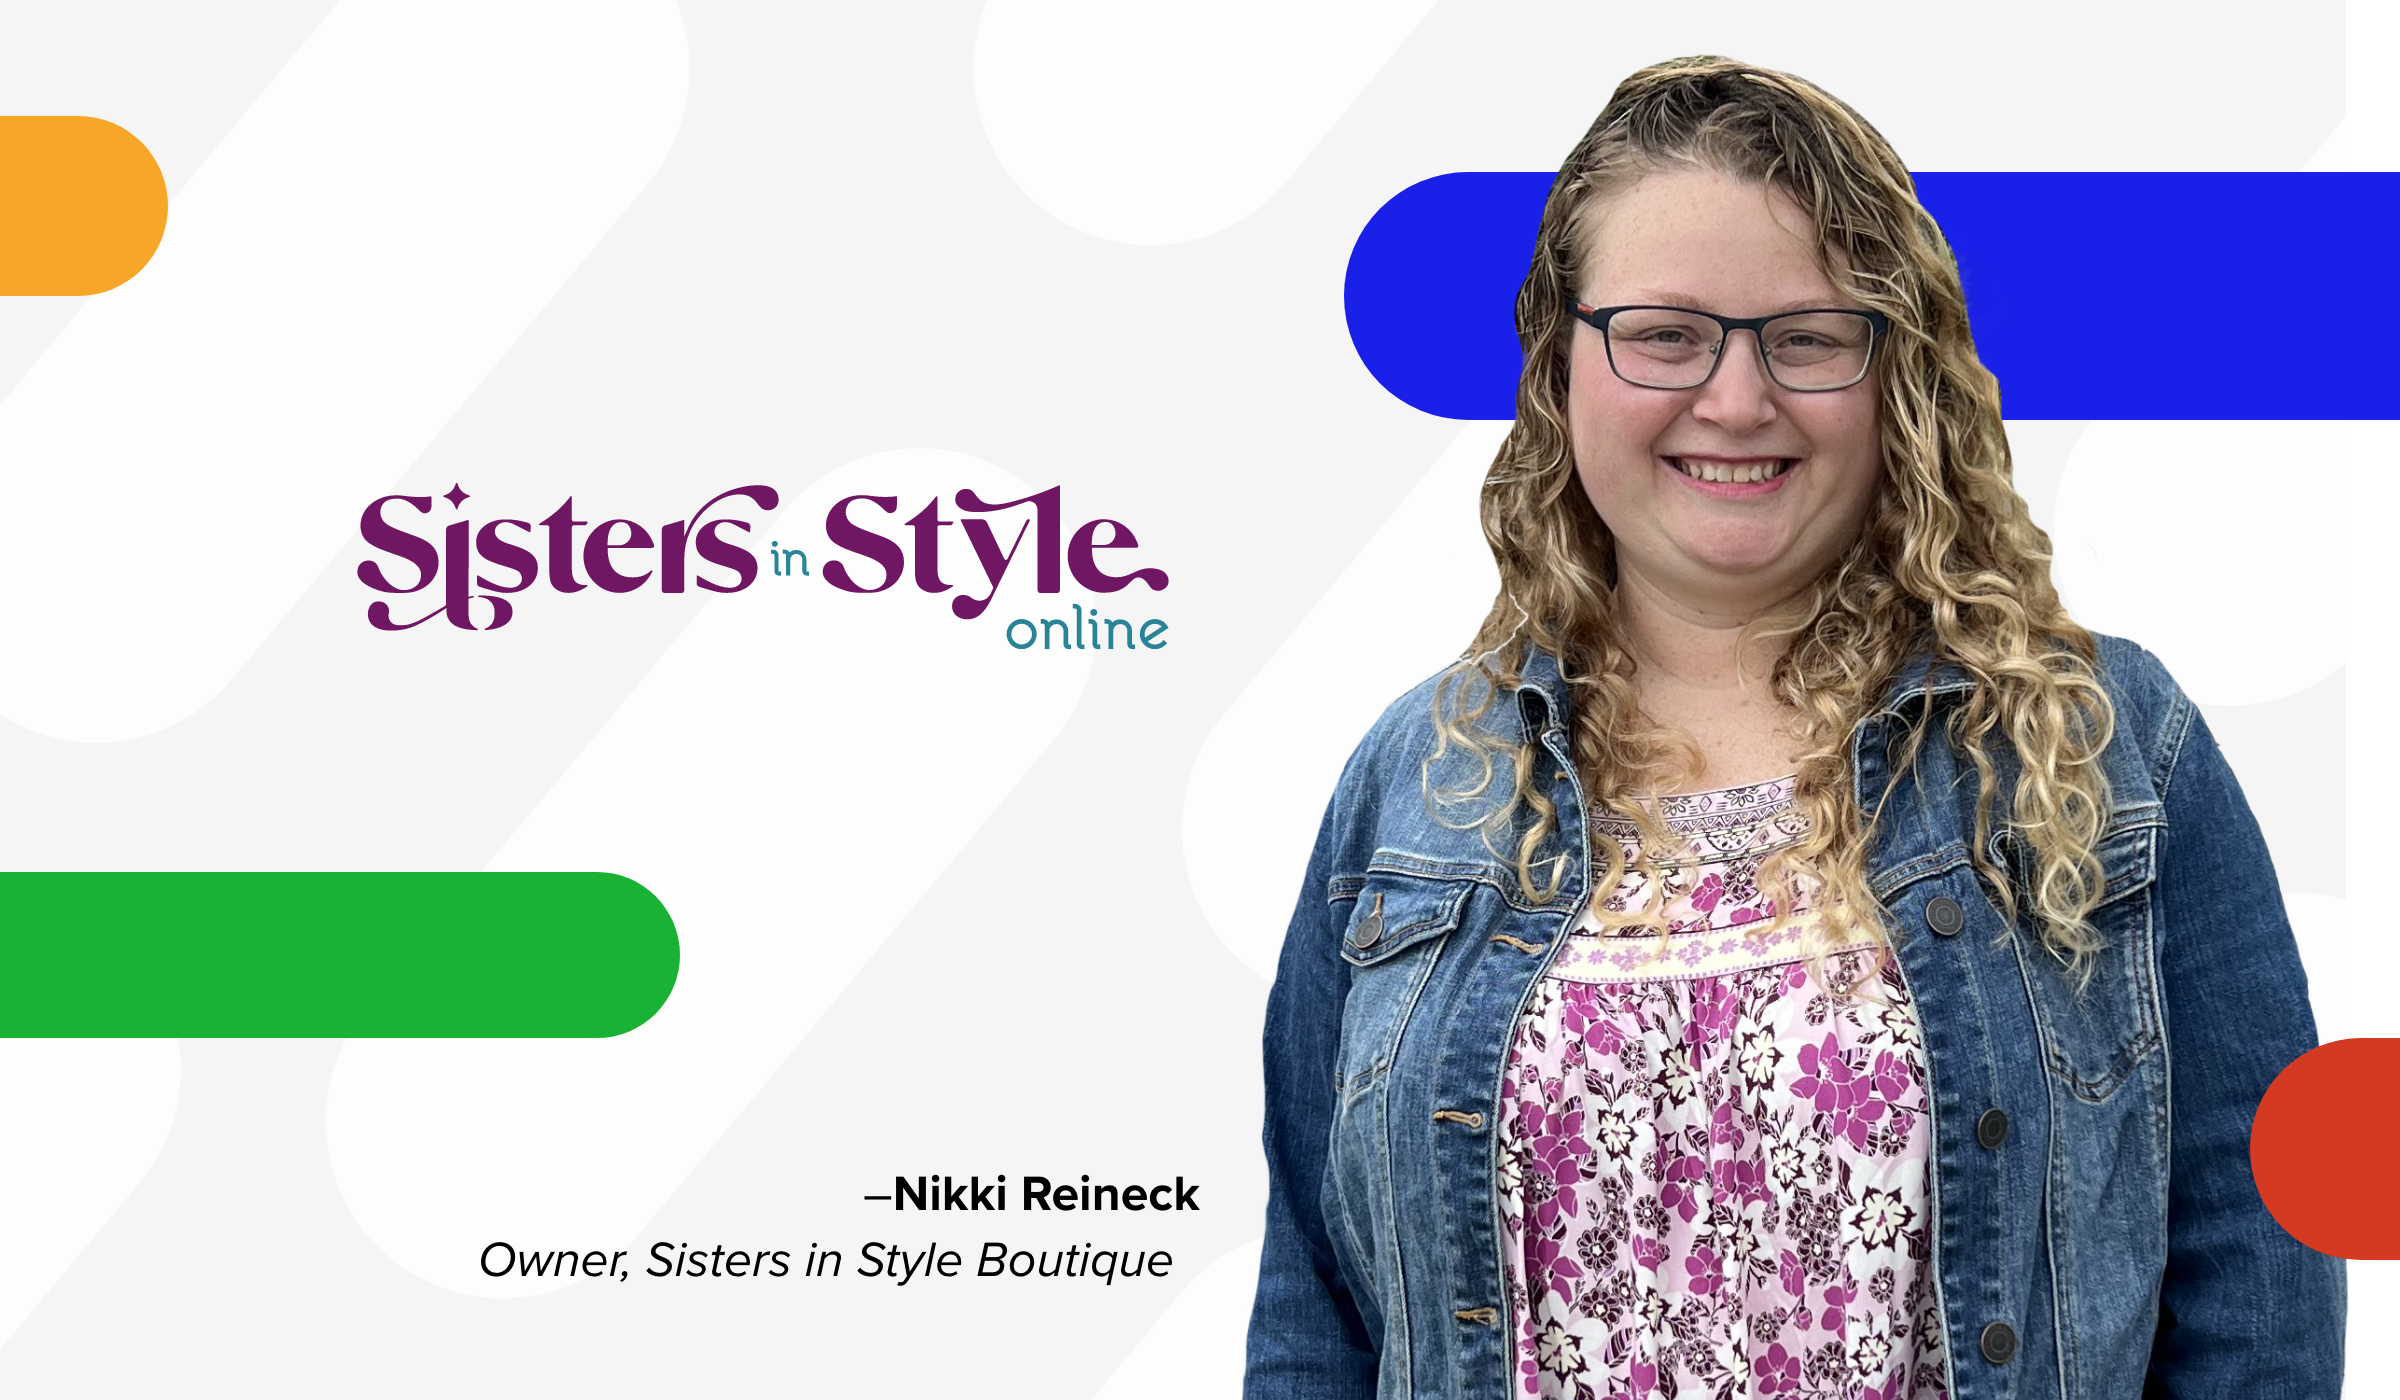 Nikki Reineck, owner of Sisters in Style Boutique